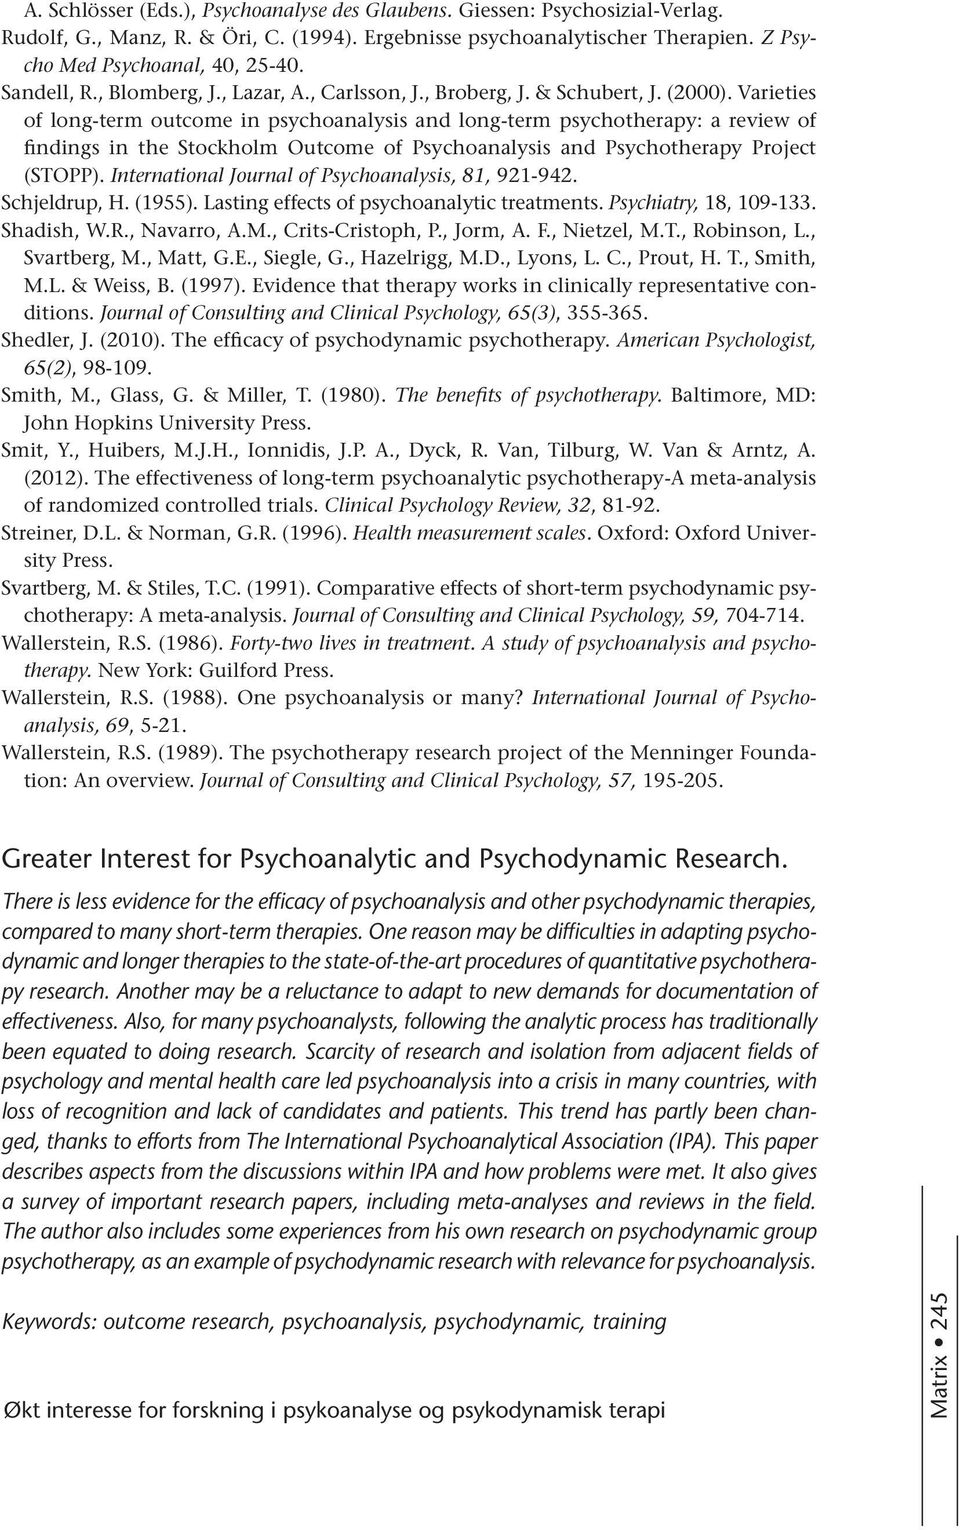 Varieties of long-term outcome in psychoanalysis and long-term psychotherapy: a review of findings in the Stockholm Outcome of Psychoanalysis and Psychotherapy Project (STOPP).